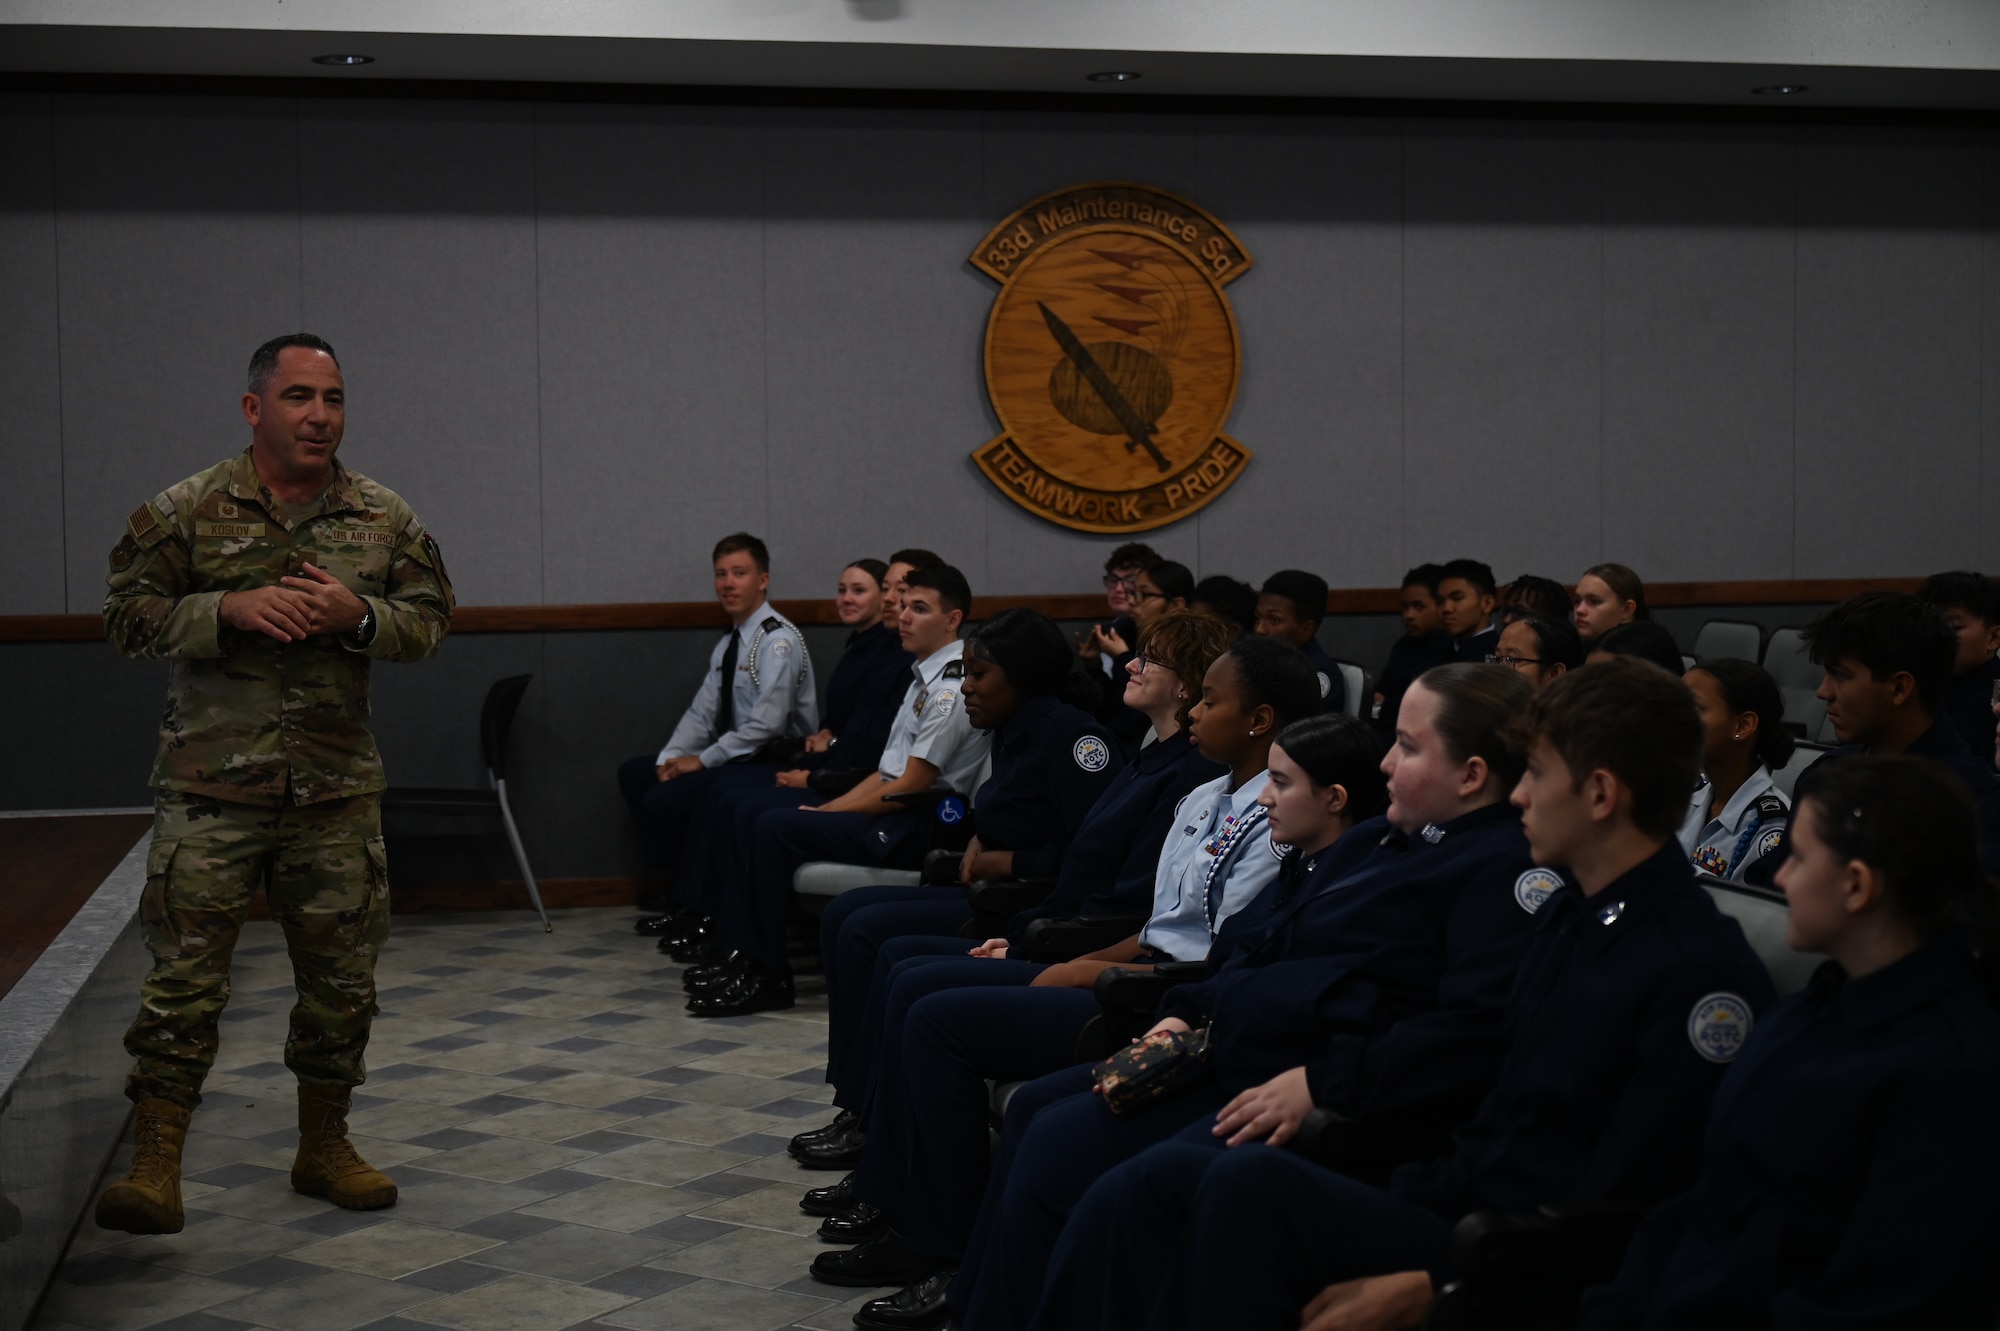 U.S. Air Force Col. Josh Koslov, 350th Spectrum Warfare Wing commander, answers questions from Pensacola High School Air Force JROTC cadets during a wing visit at Eglin Air Force, Fla., Nov. 1, 2023. Cadets visited the 350th SWW to learn more about the operational Air Force, the wing’s mission to provide expert Electronic Warfare support and attack as well as learn about future career opportunities. (U.S. Air Force photo by Capt. Benjamin Aronson)